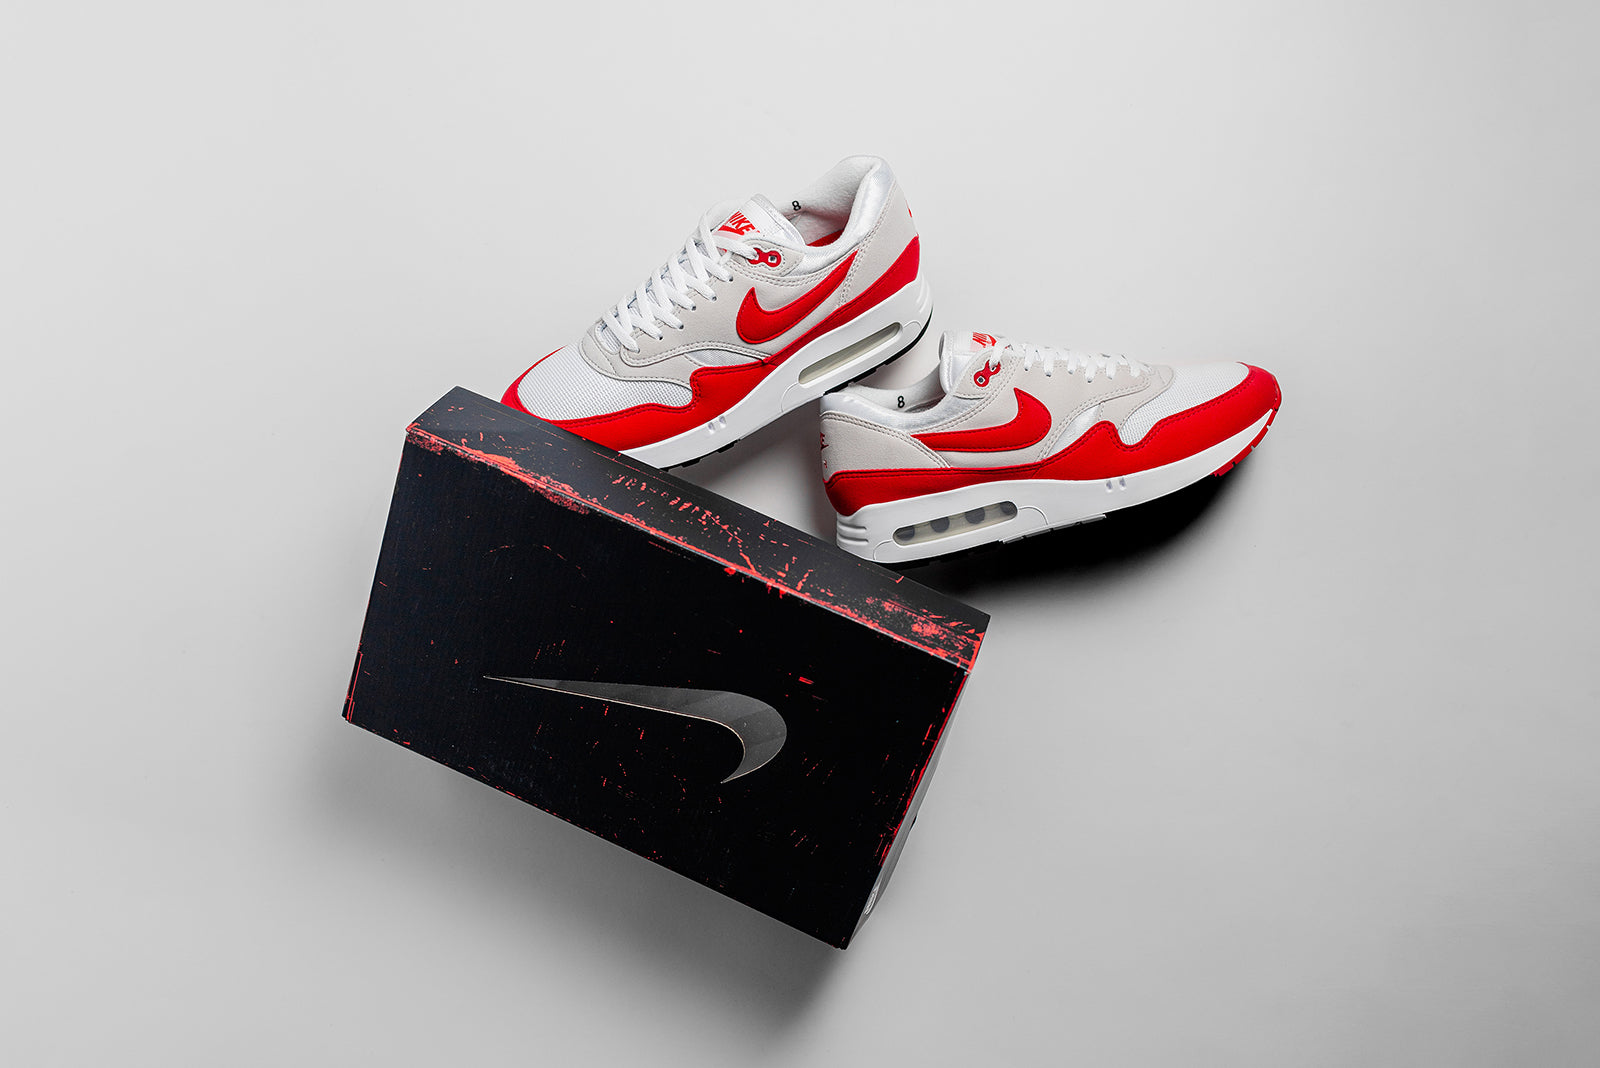 FIRST LOOK: Nike Air Max 1 '86 OG 'Big Bubble' – HANON